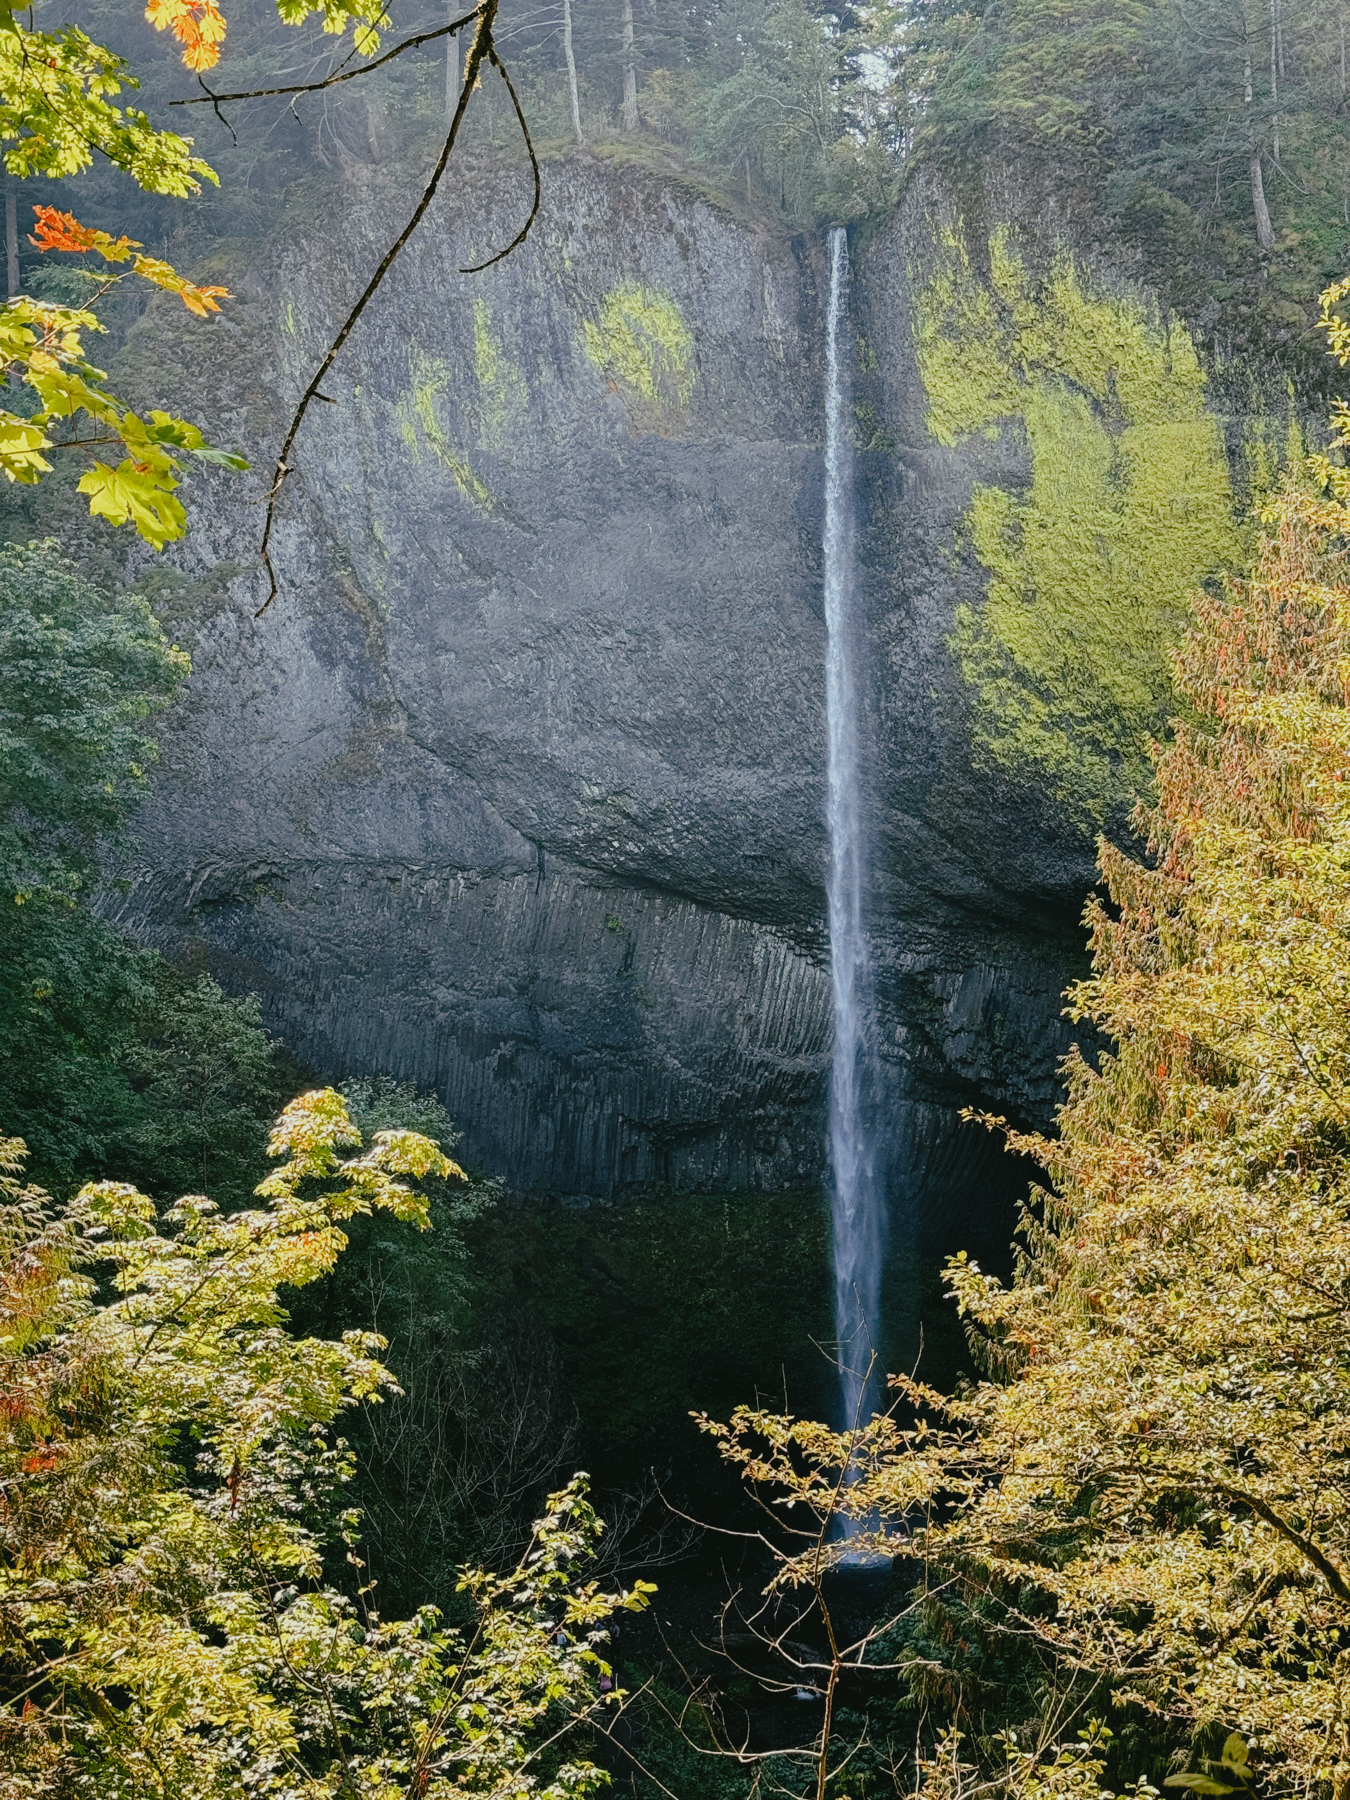 A tall thin waterfall backed by a large gray rock wall. Trees with fall colors in the foreground.